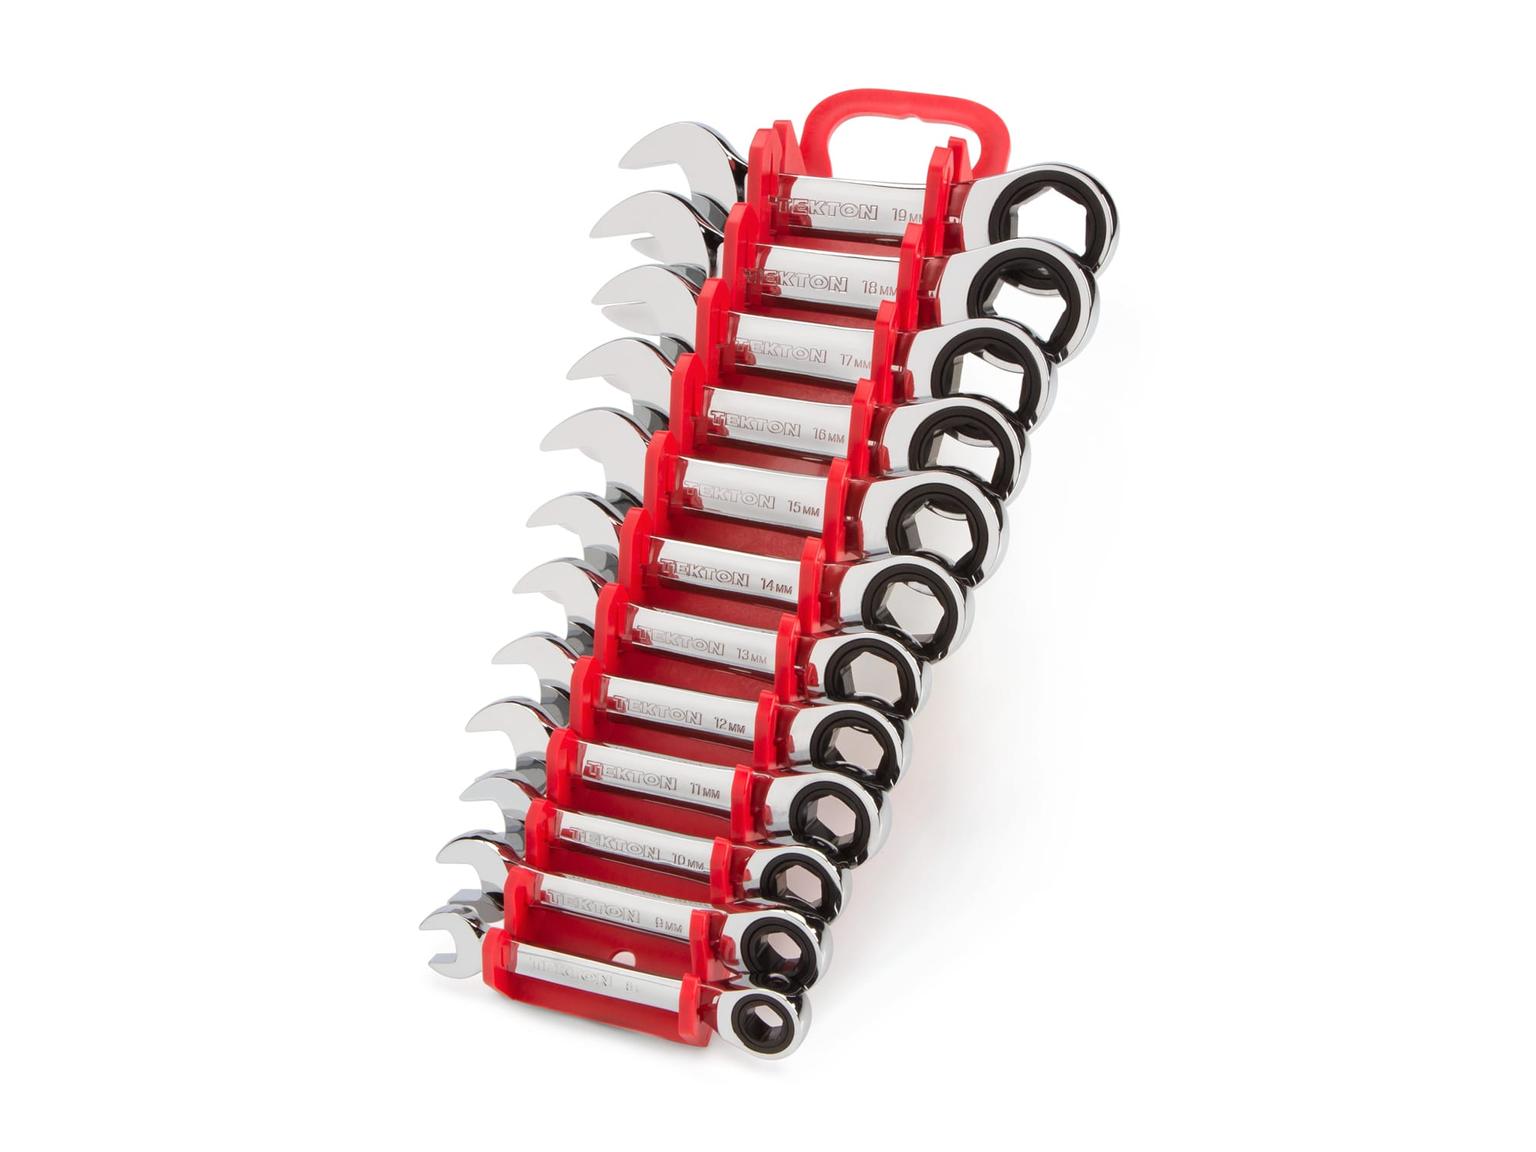 TEKTON WRN50170-T Stubby Ratcheting Combination Wrench Set with Holder, 12-Piece (8-19 mm)